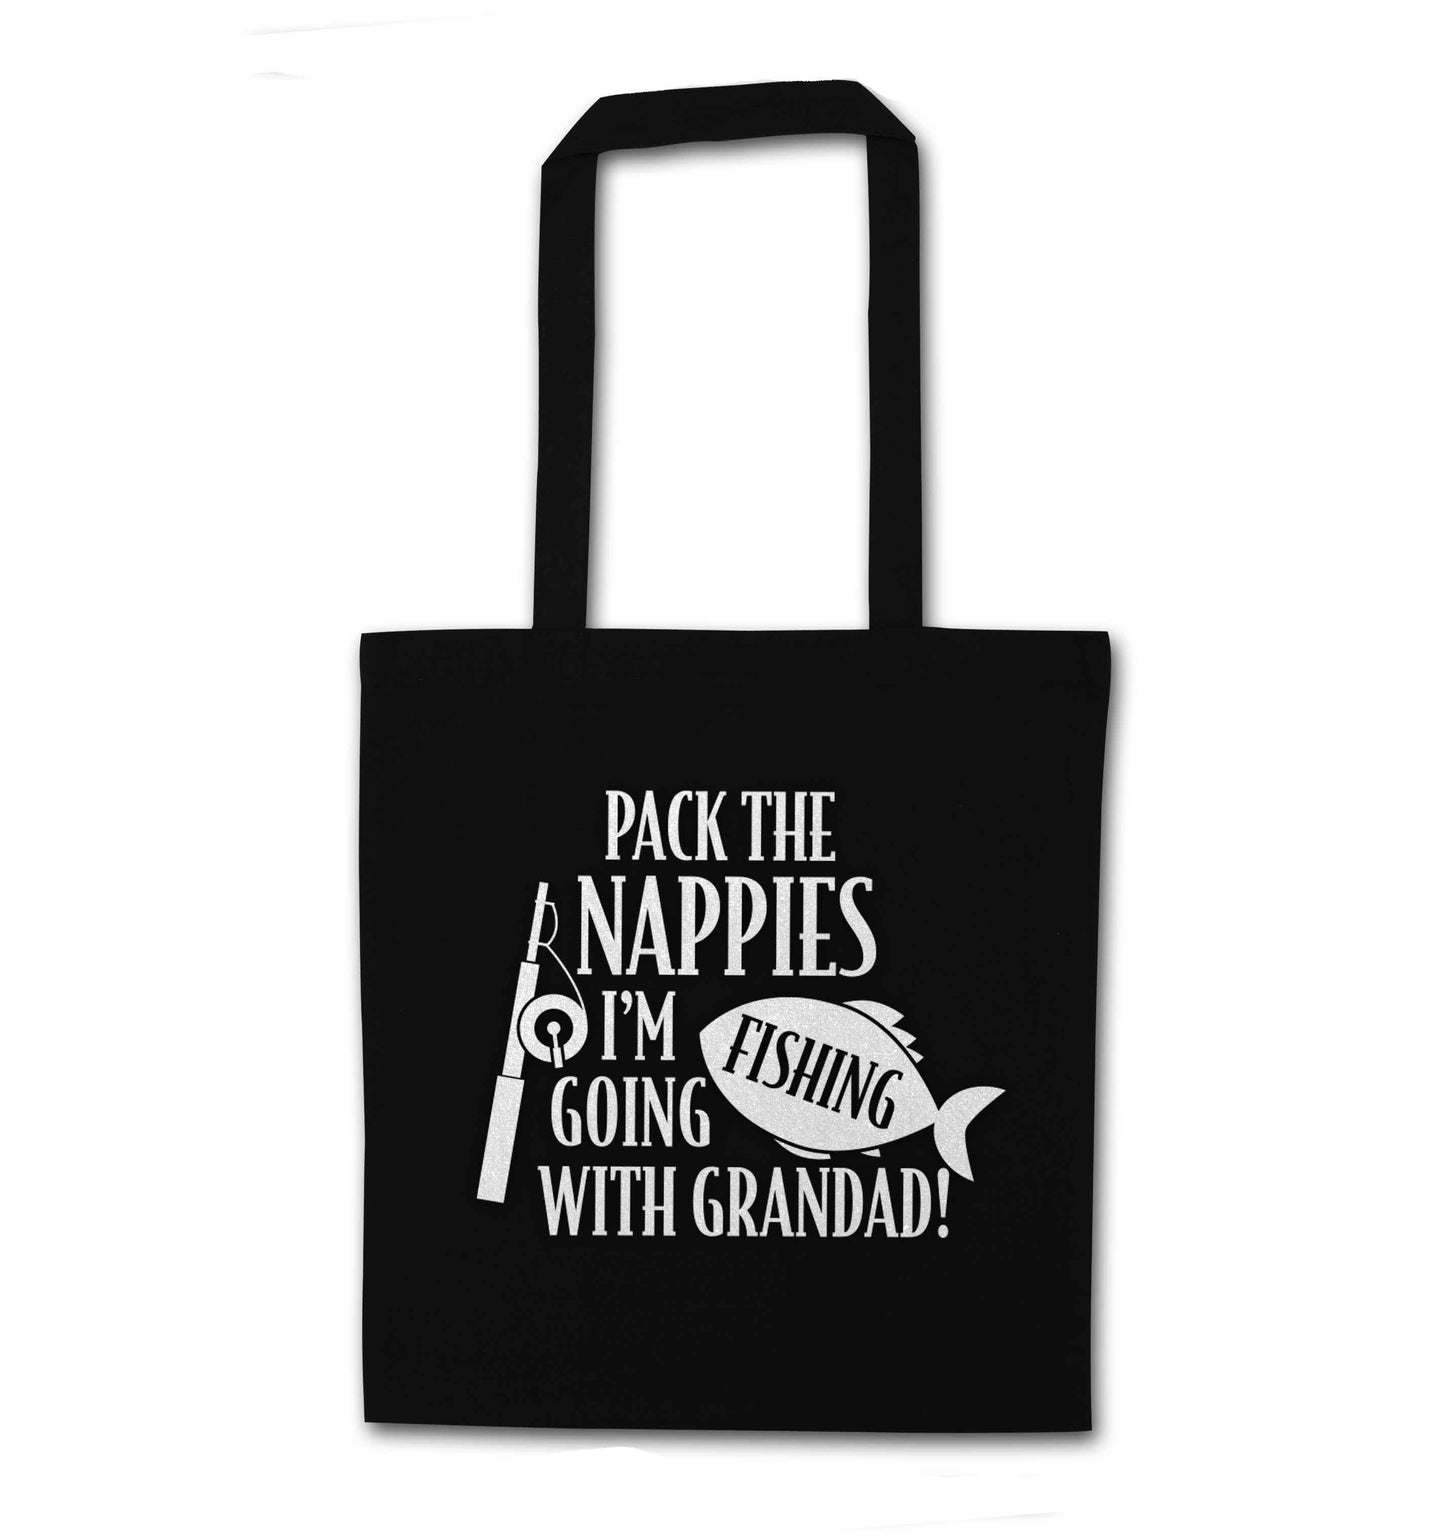 Pack the nappies I'm going fishing with Grandad black tote bag